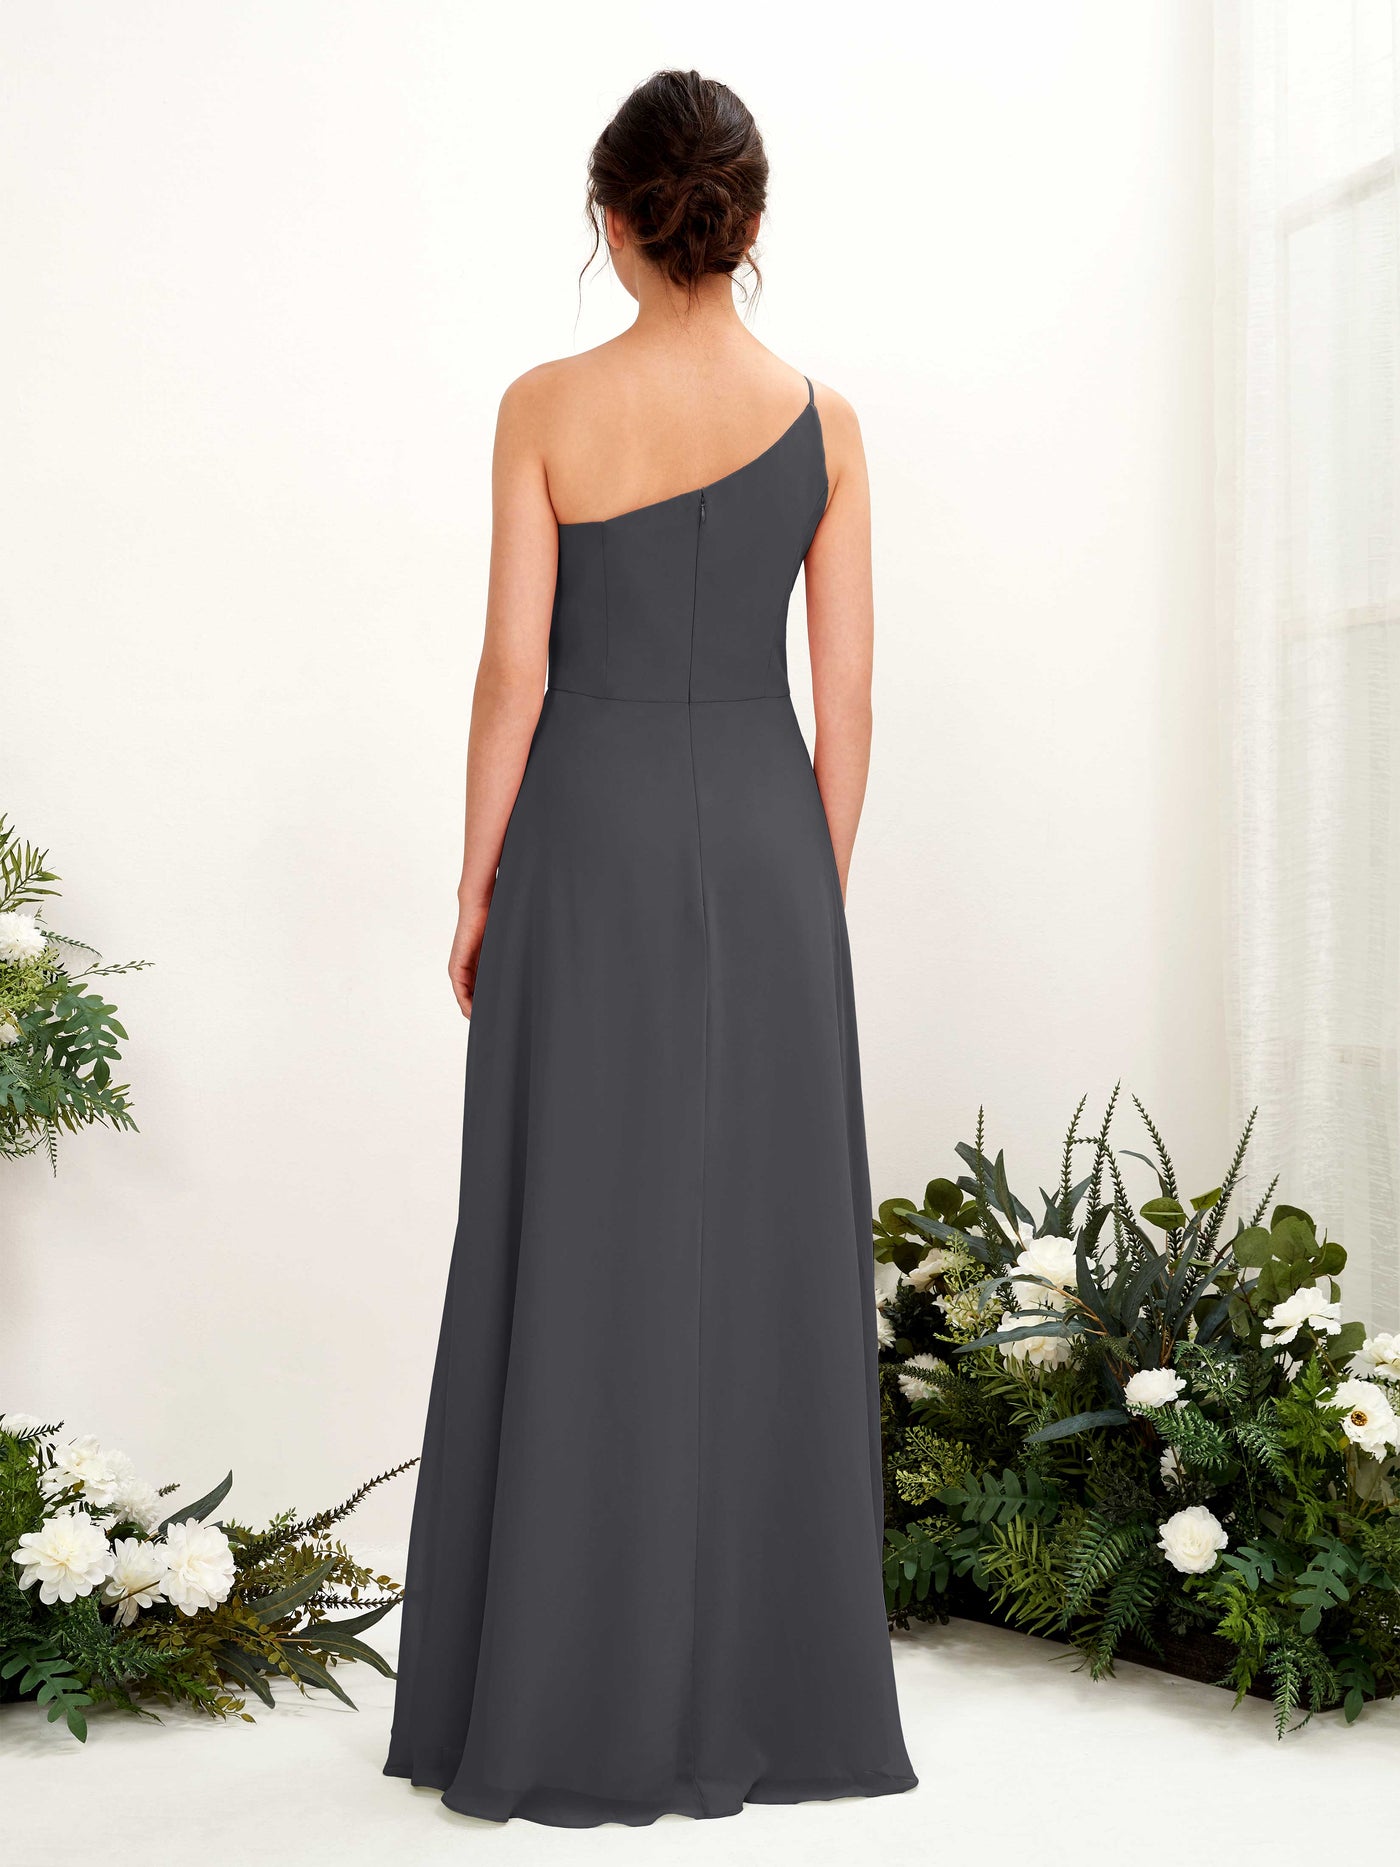 Pewter Bridesmaid Dresses Bridesmaid Dress A-line Chiffon One Shoulder Full Length Sleeveless Wedding Party Dress (81225738)#color_pewter